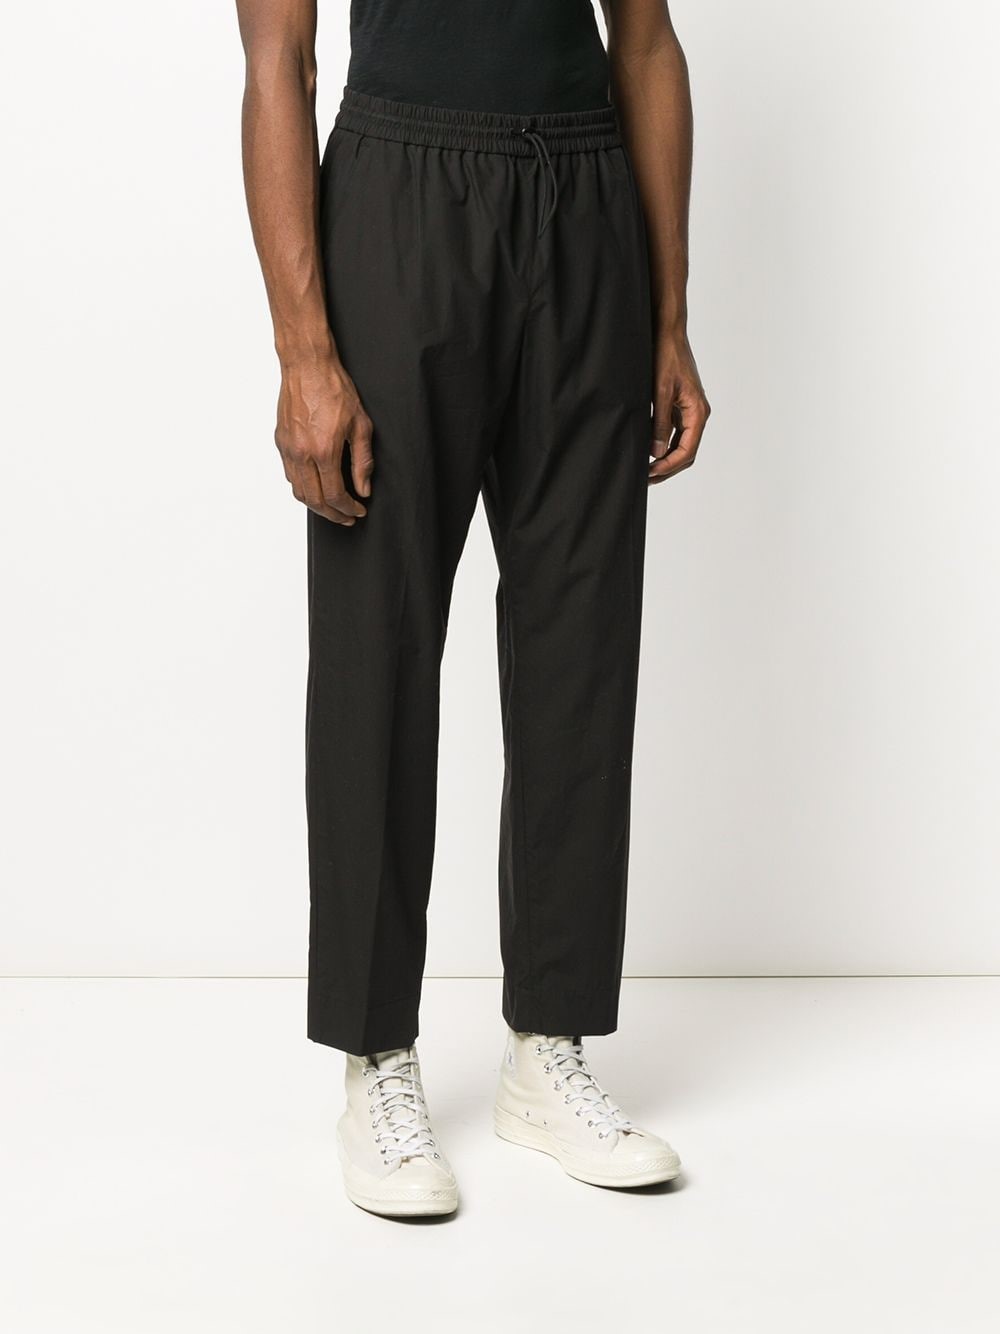 kenzo TROUSERS available on montiboutique.com - 33616